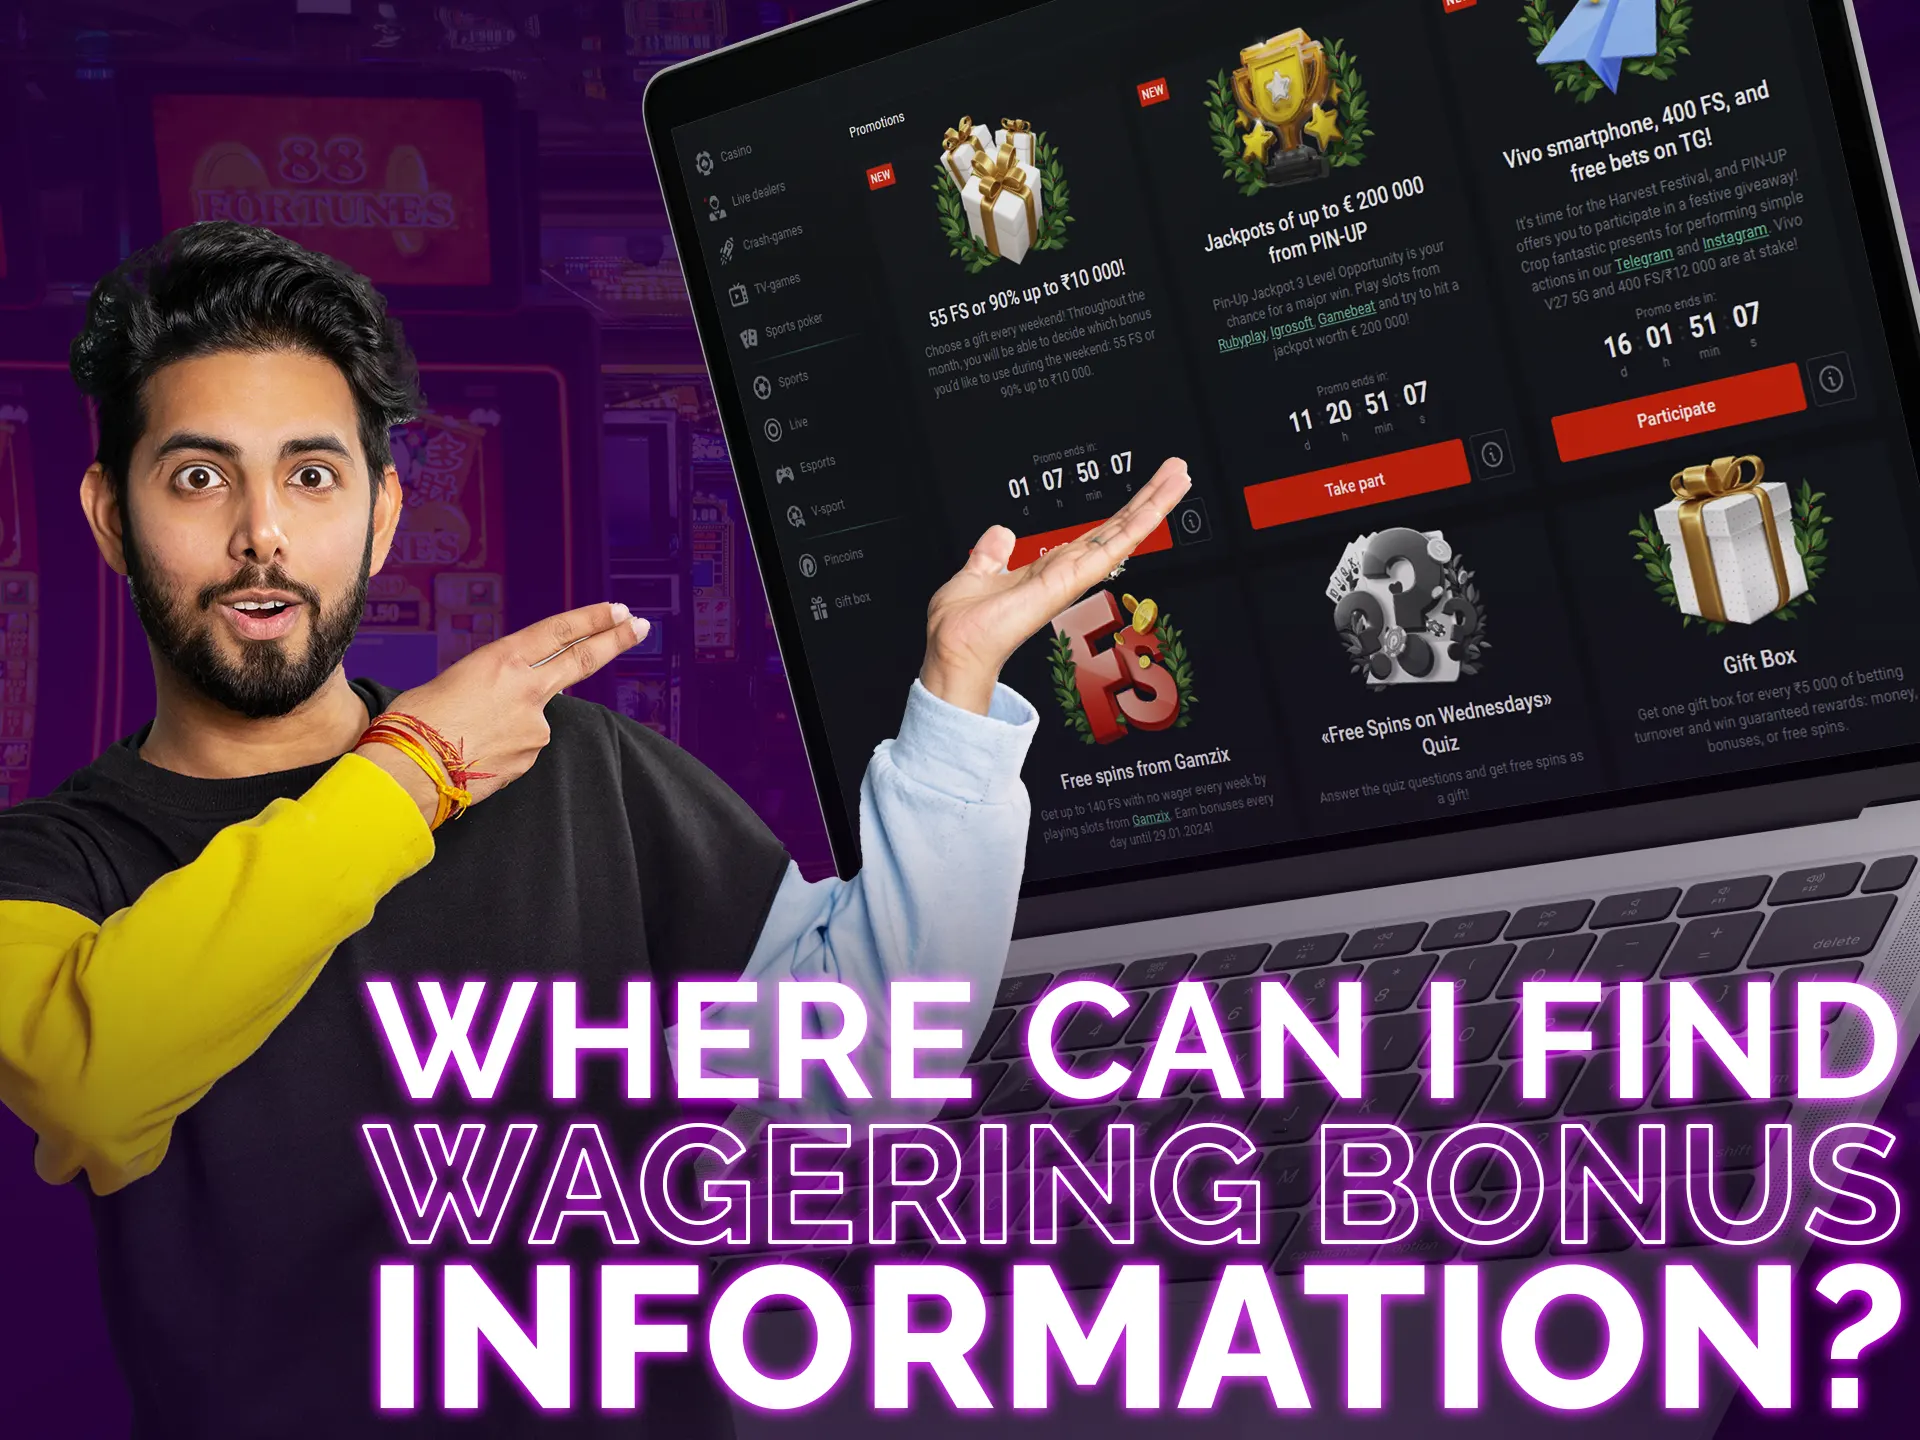 Check bonus wagering details in rules or ask support.